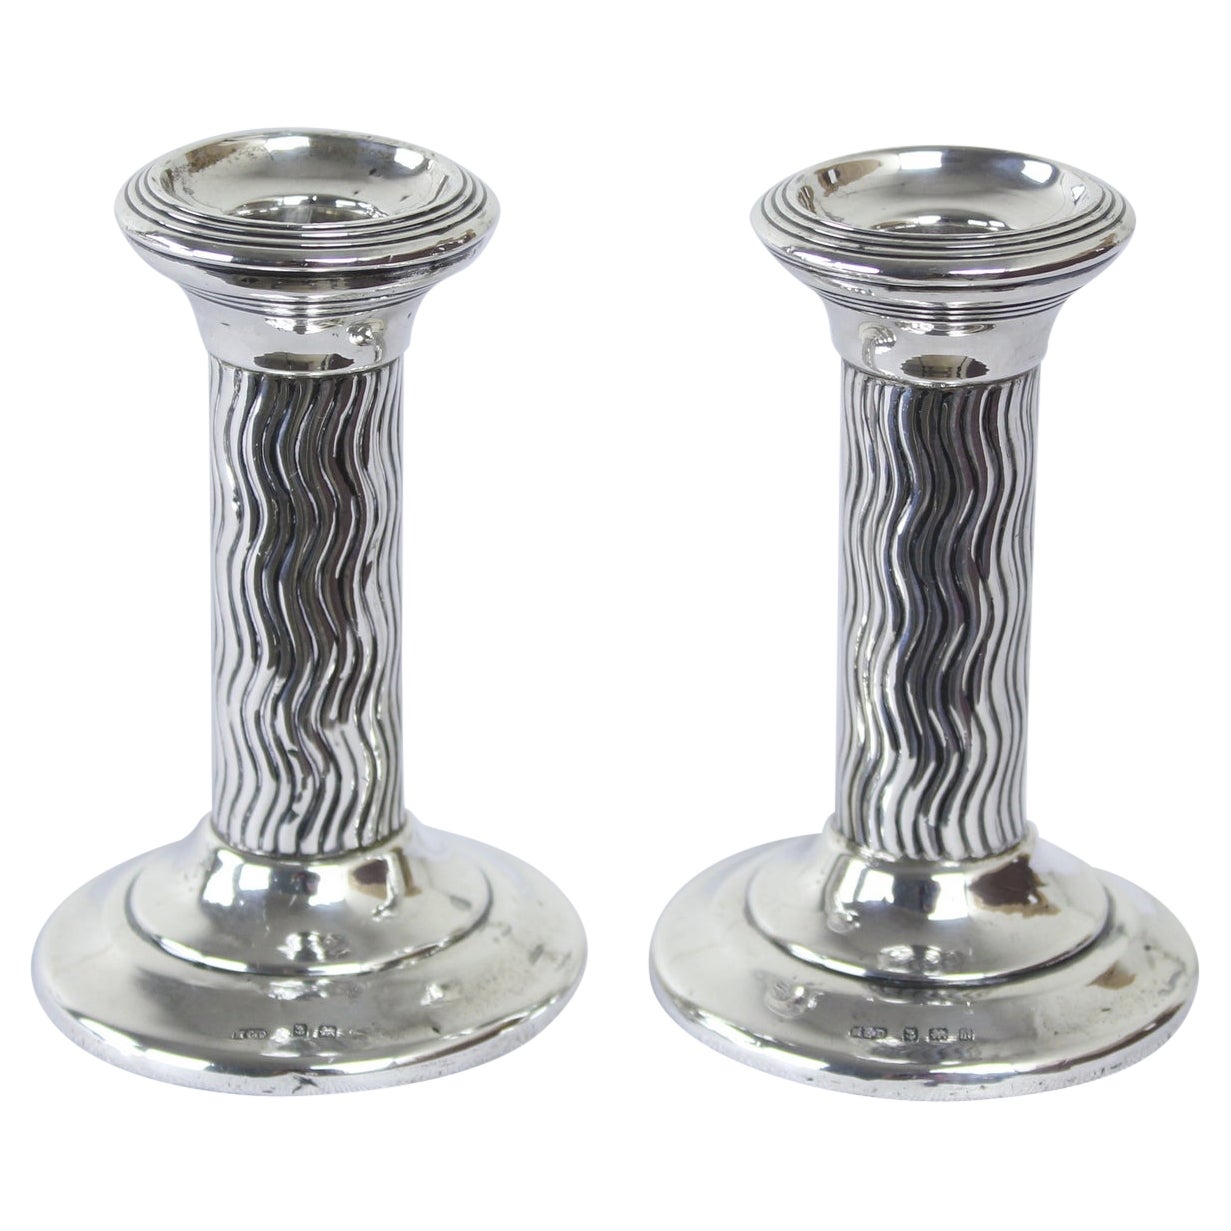 Pair of Hallmarked Arts and Crafts Silver Candlesticks For Sale at 1stDibs